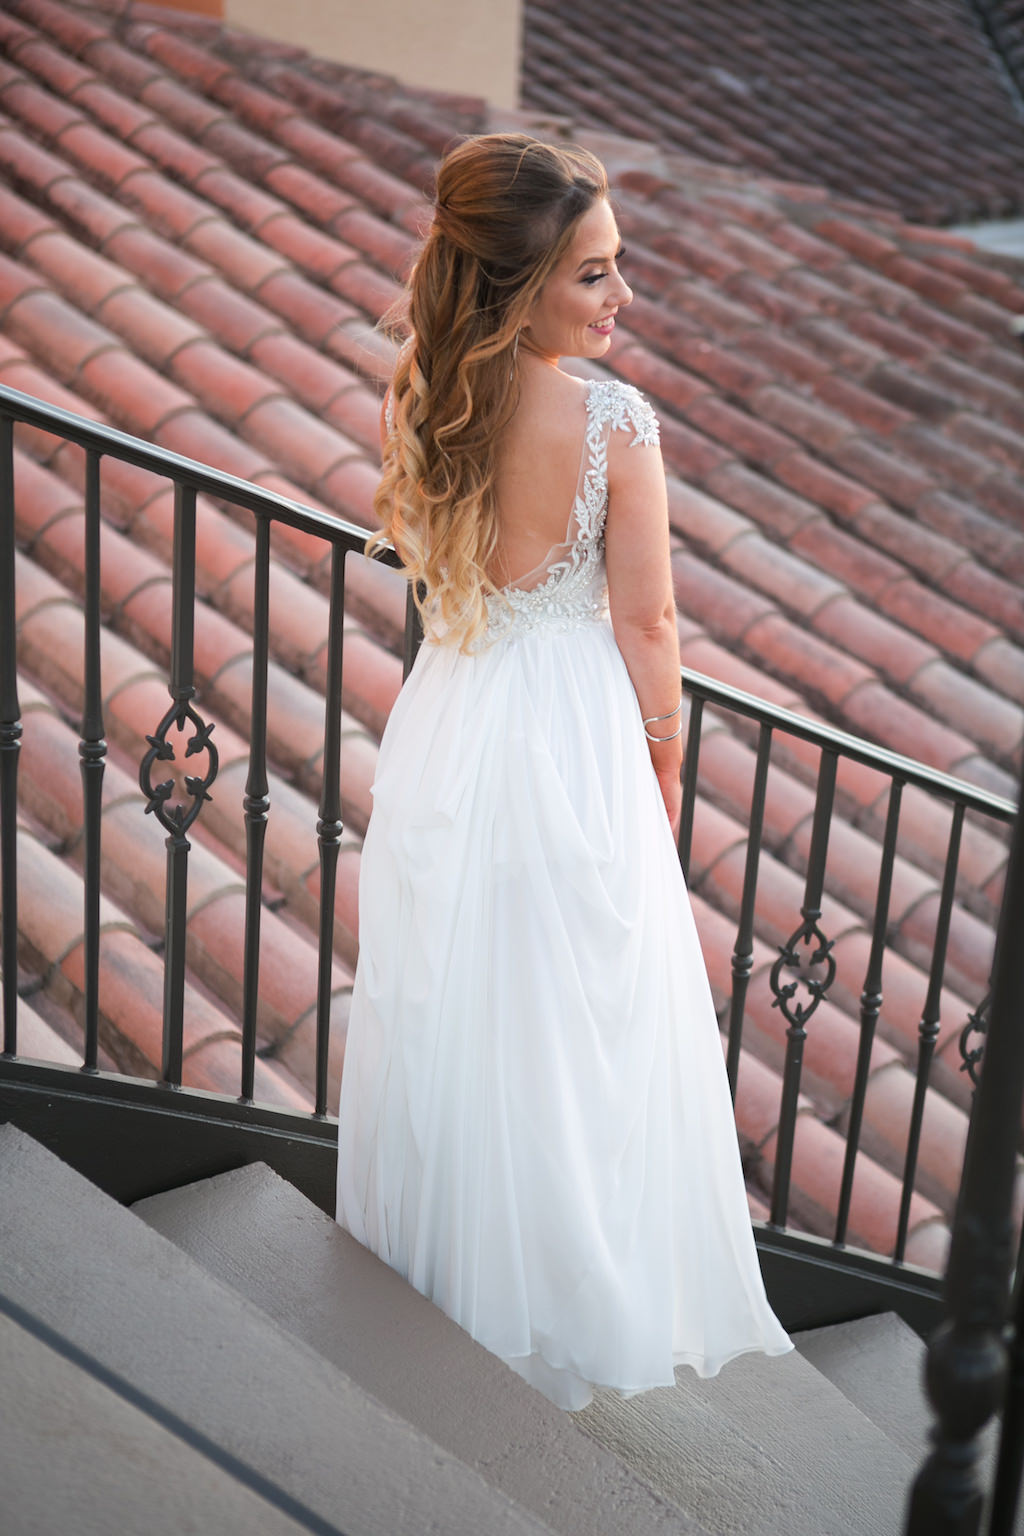 Outdoor Bridal Portrait on Staircase in Maggie Sottero A-Line Illussion Tank Top Low-Back Wedding Dress with Lace Applique and Rhinestone Beaded Bodice | Sarasota Wedding Photographer Carrie Wildes Photography